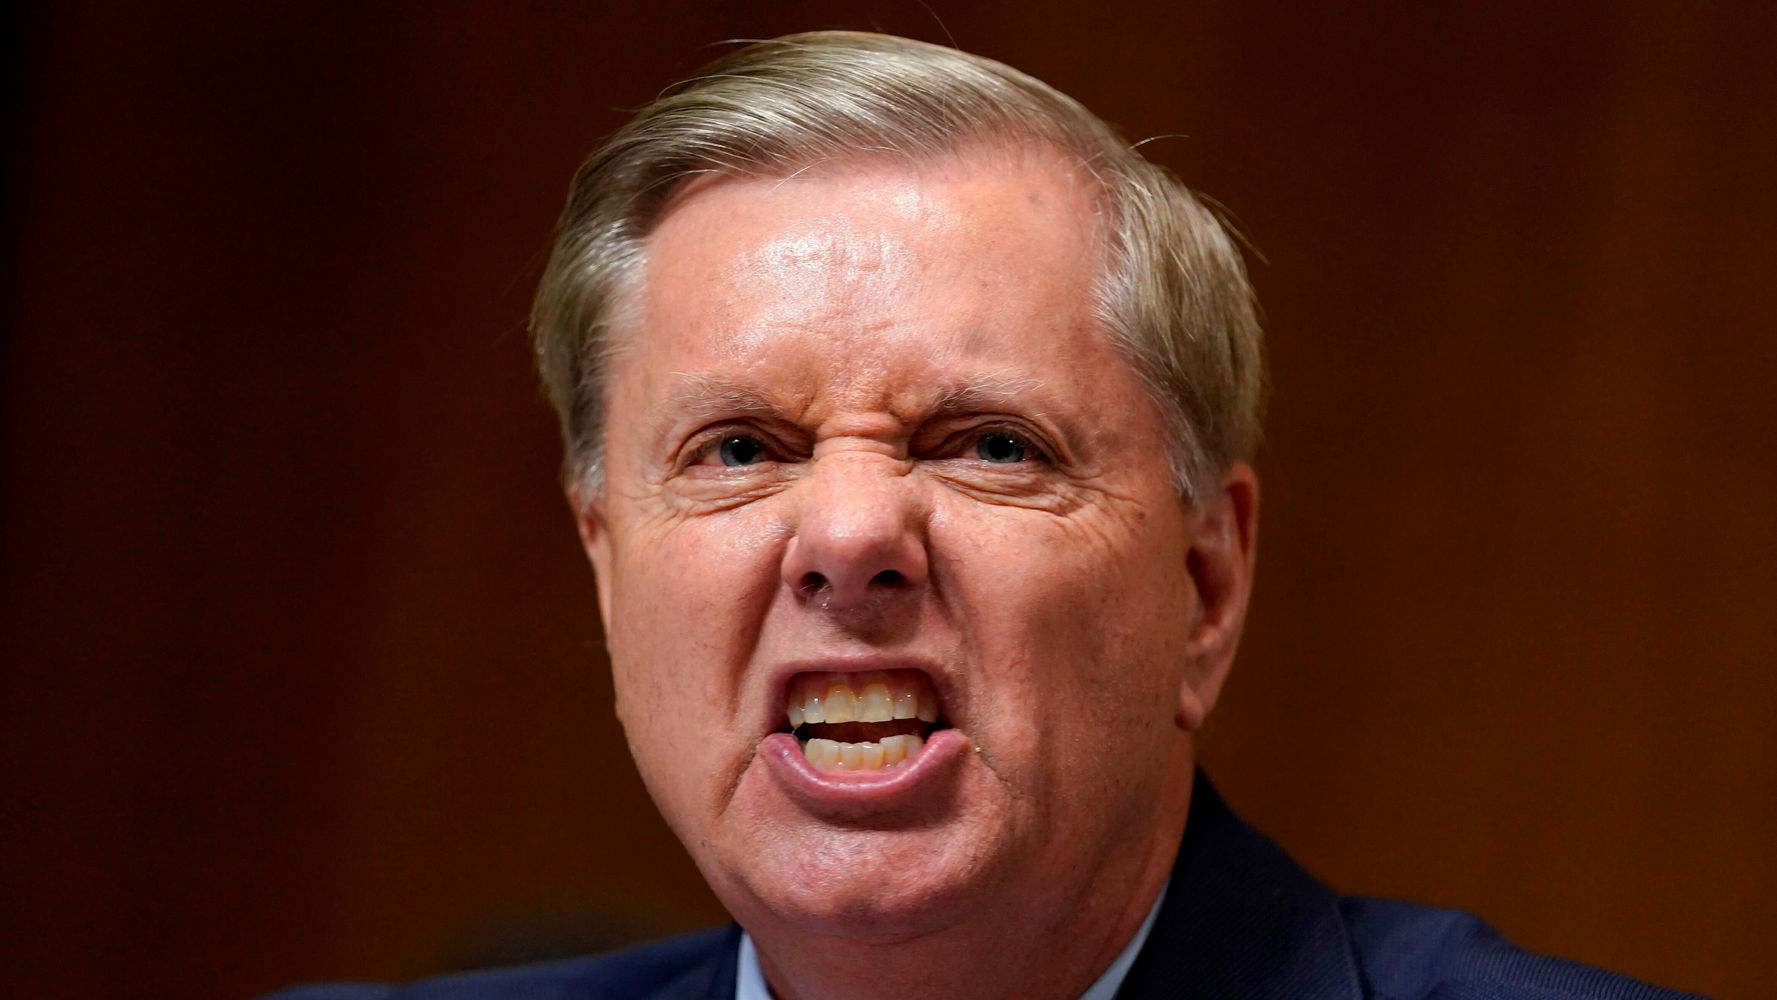 Lindsey Graham's Hypocrisies Laid Bare In Scathing 'Daily Show' Biography